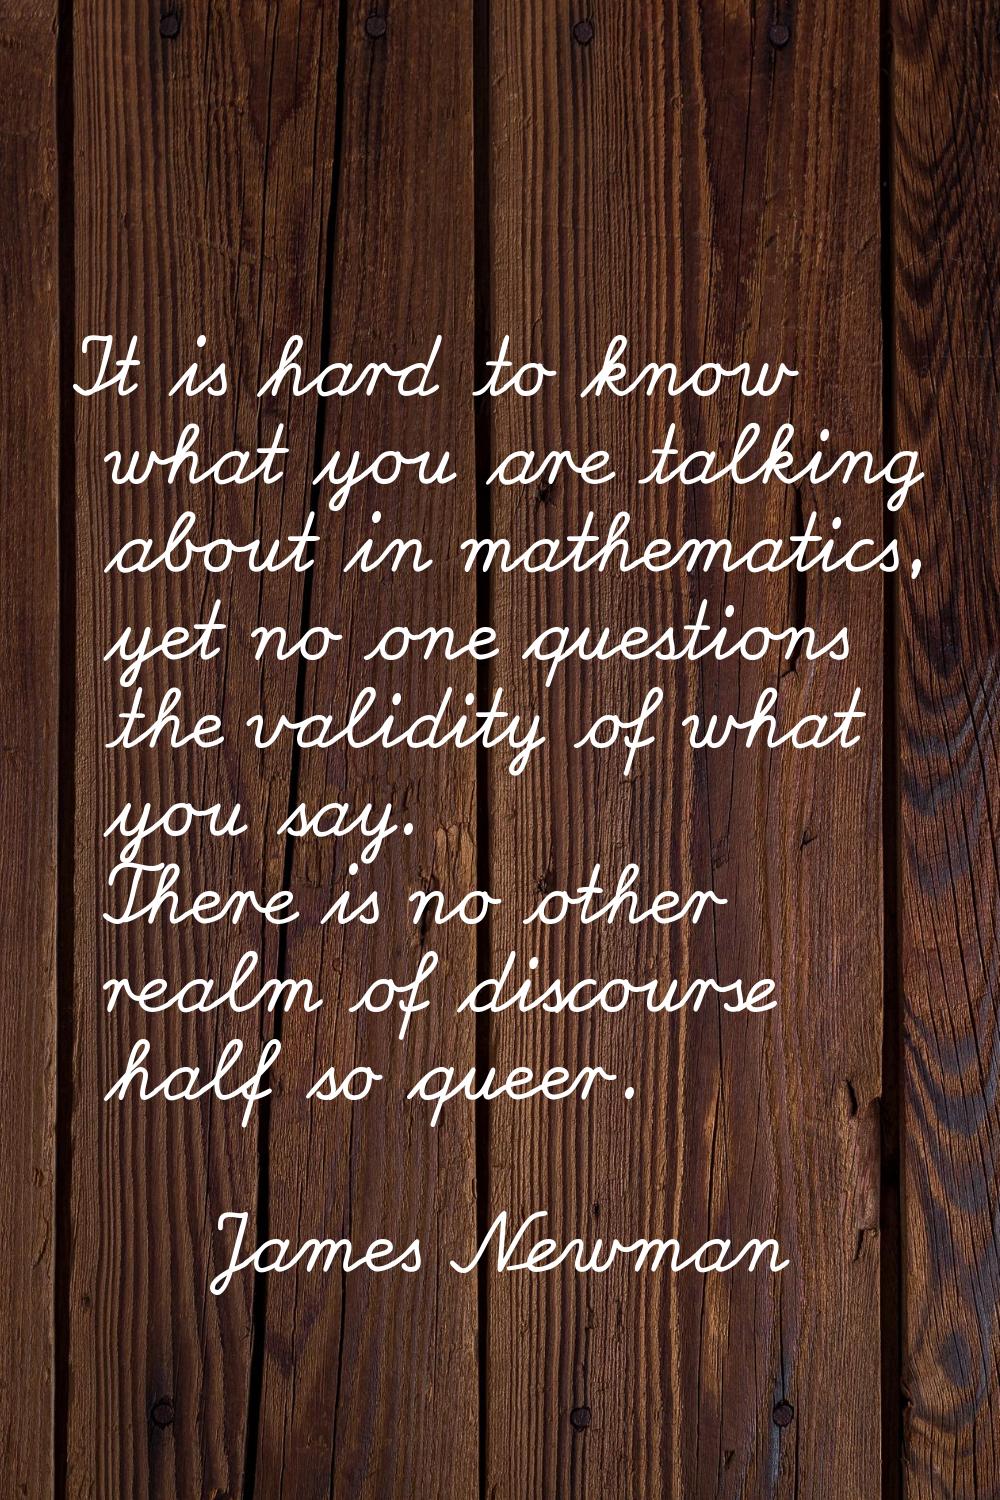 It is hard to know what you are talking about in mathematics, yet no one questions the validity of 